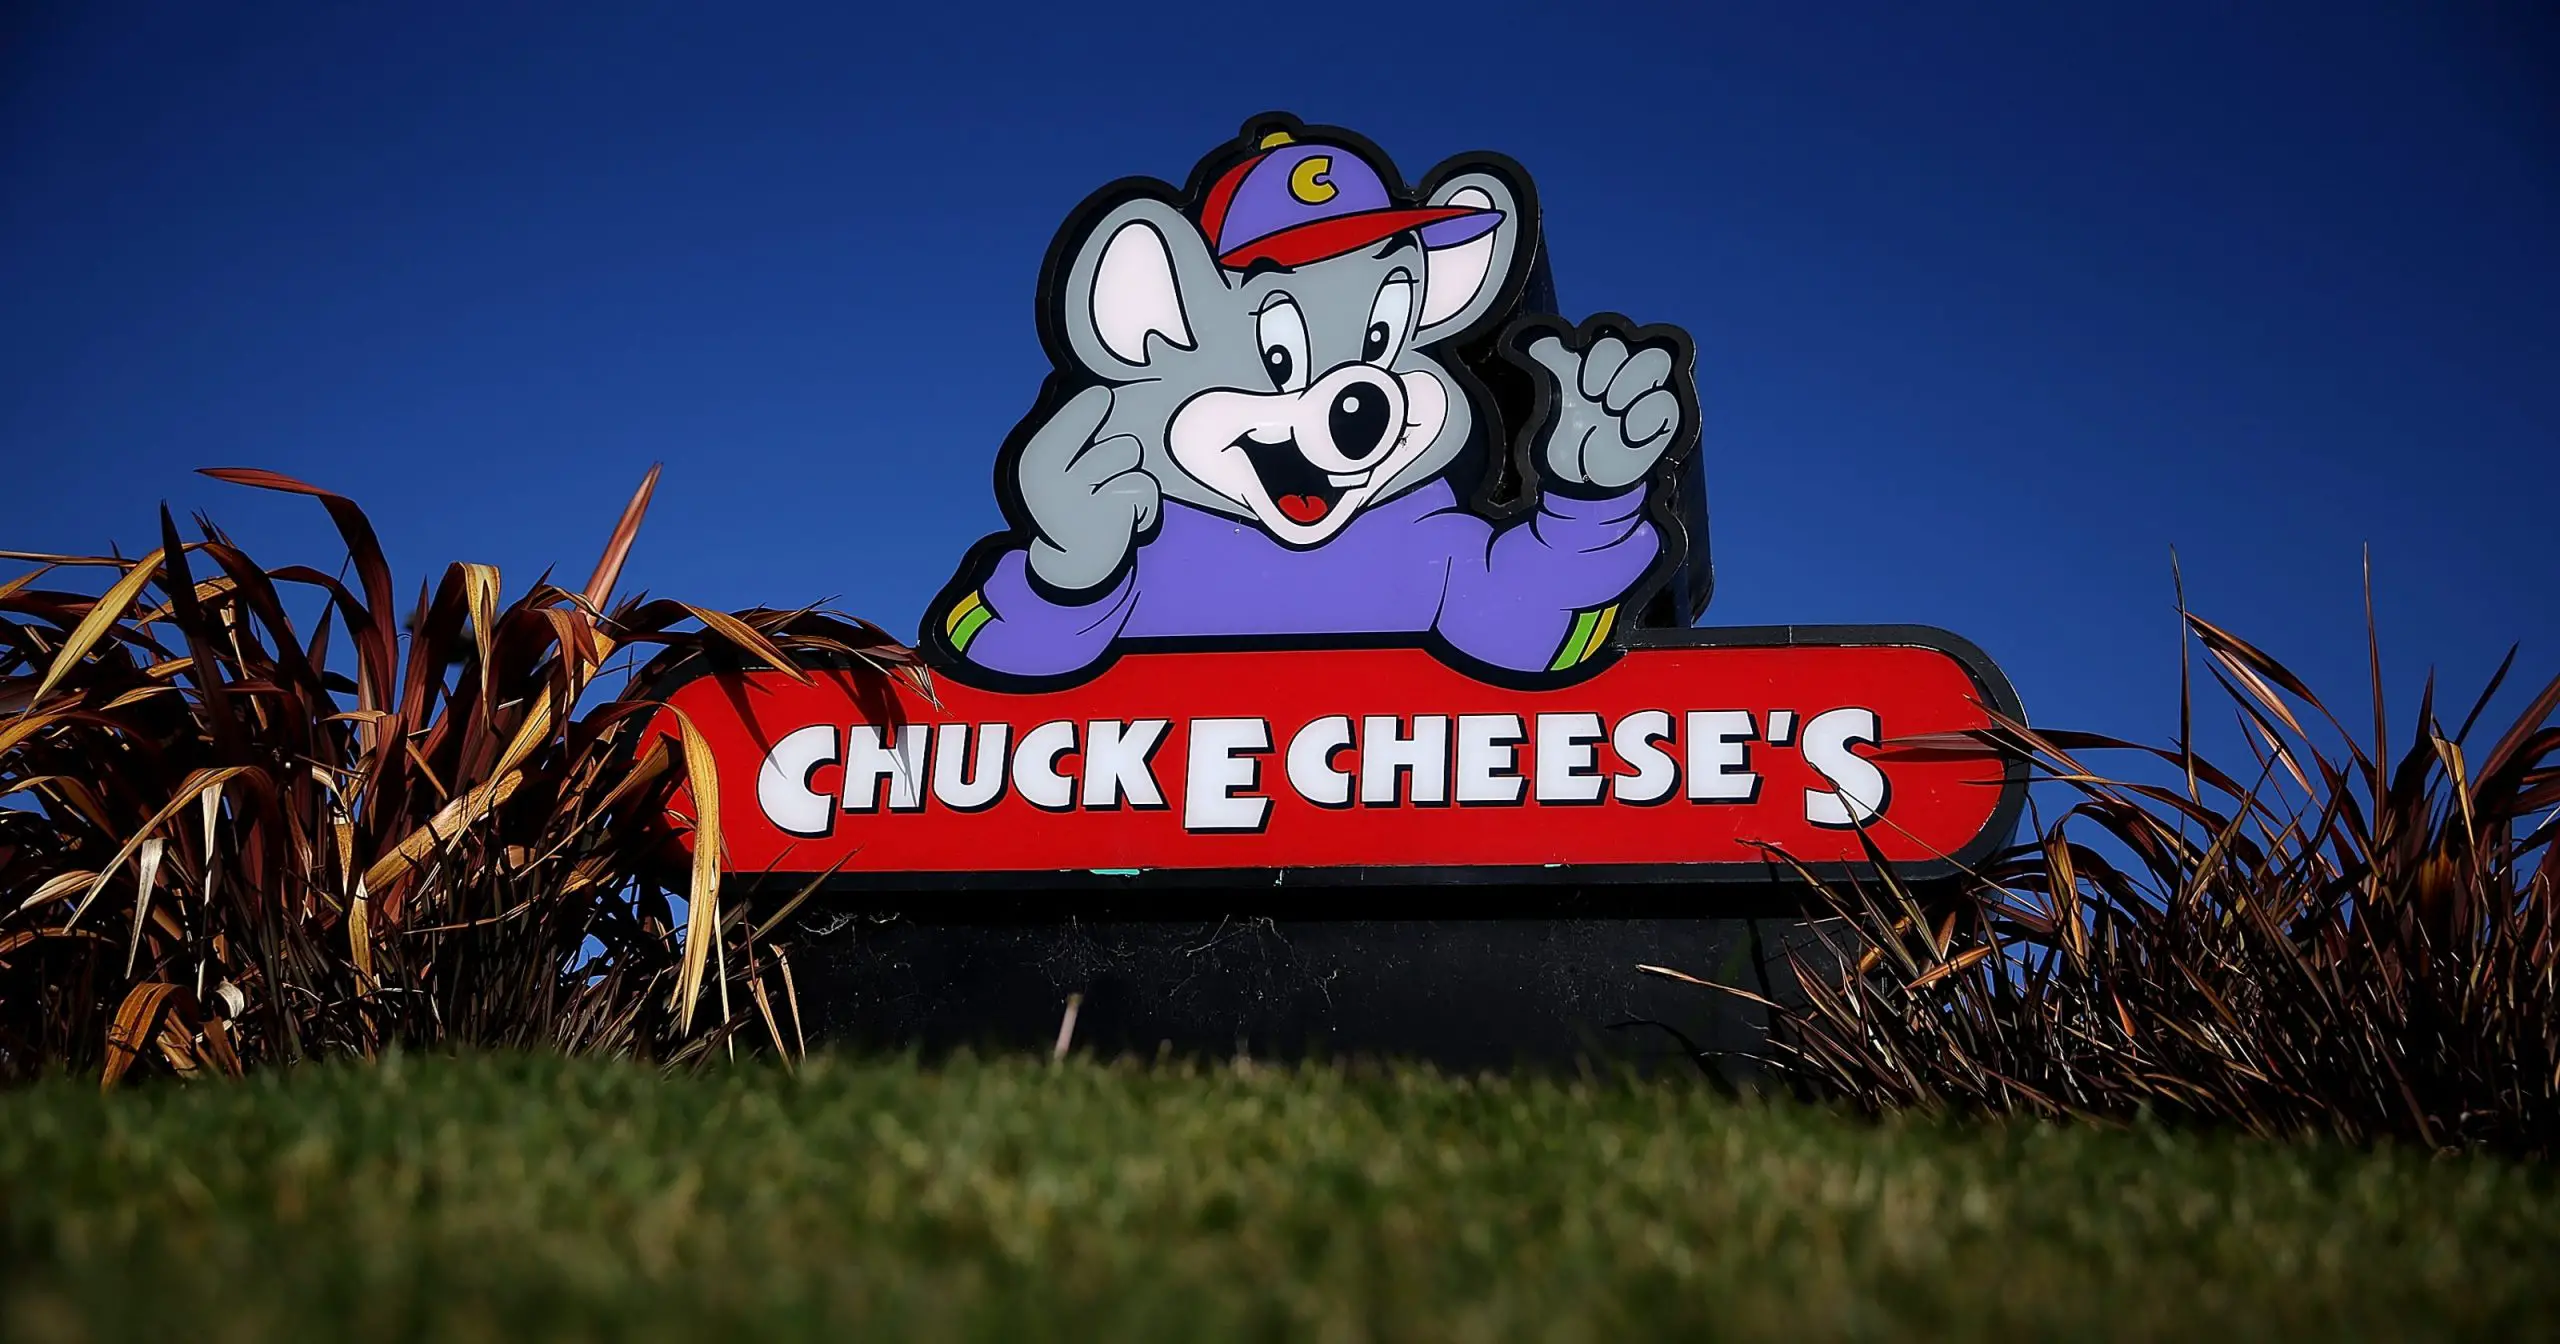 Chuck E. Cheese may be going public